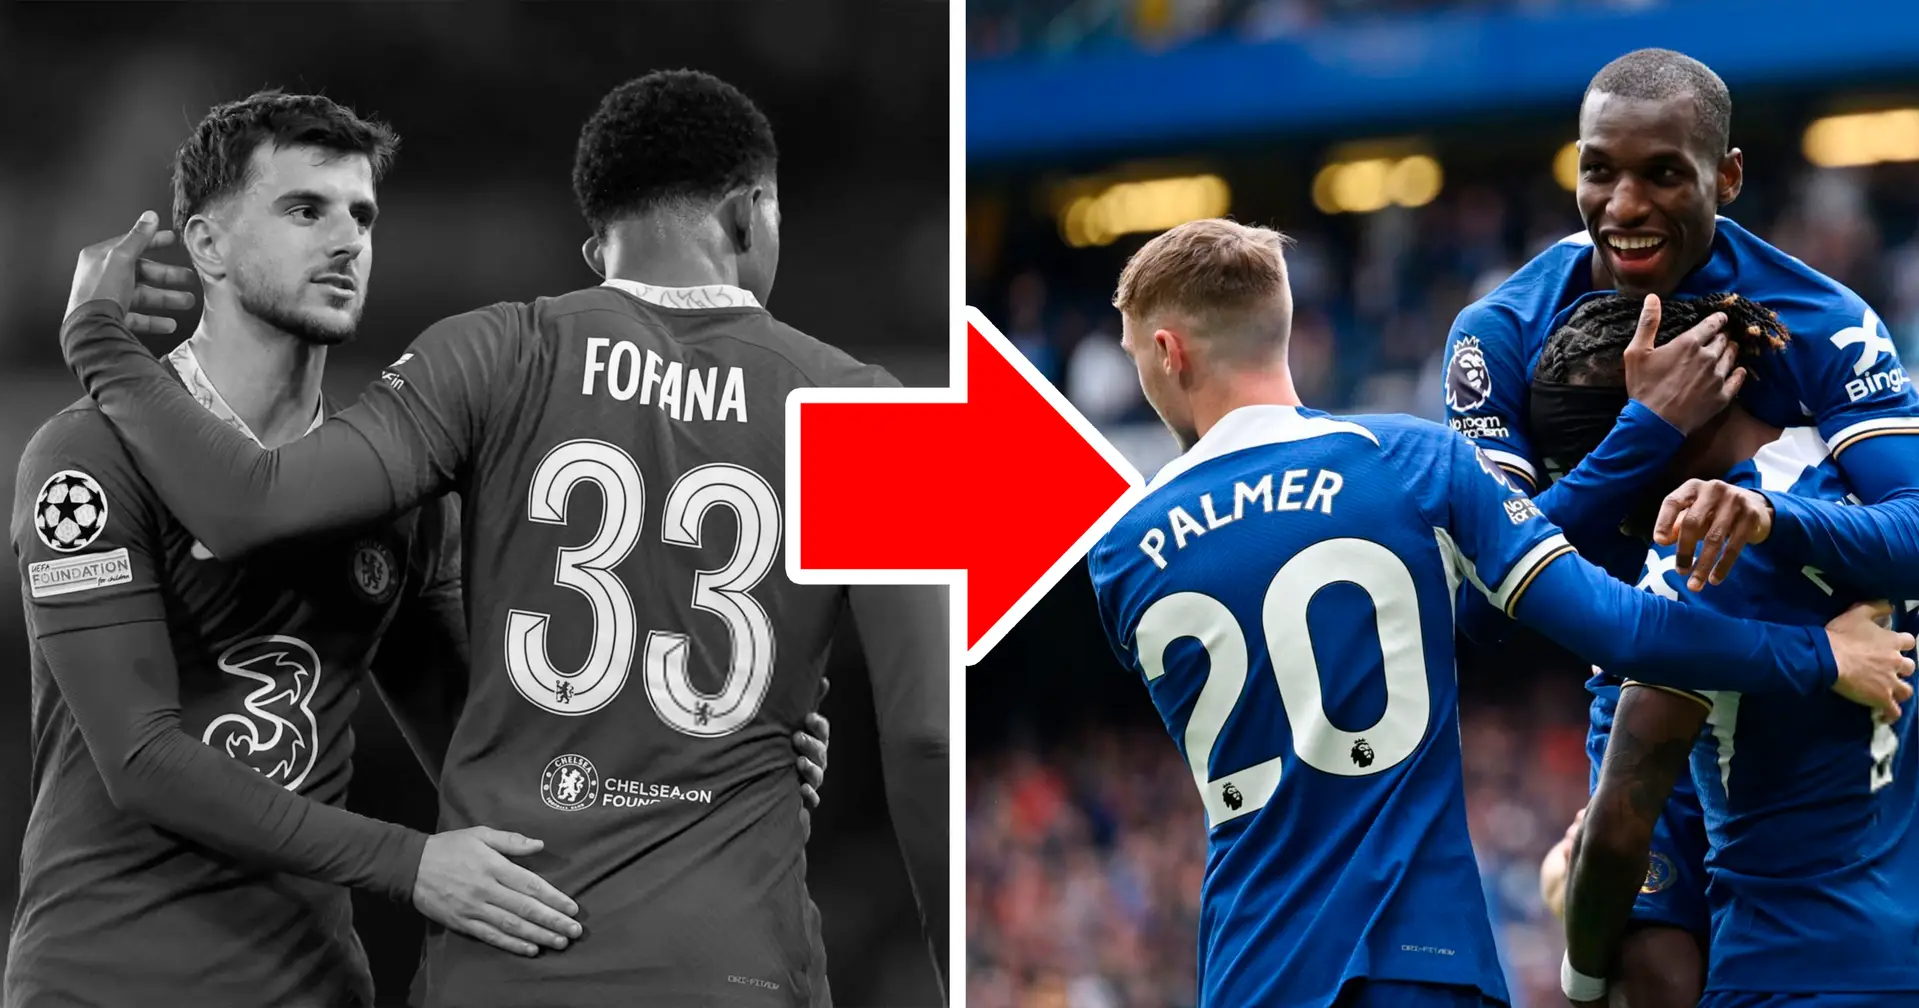 Chelsea fan compares this season to the last one - names key points of the Blues' improvement since then